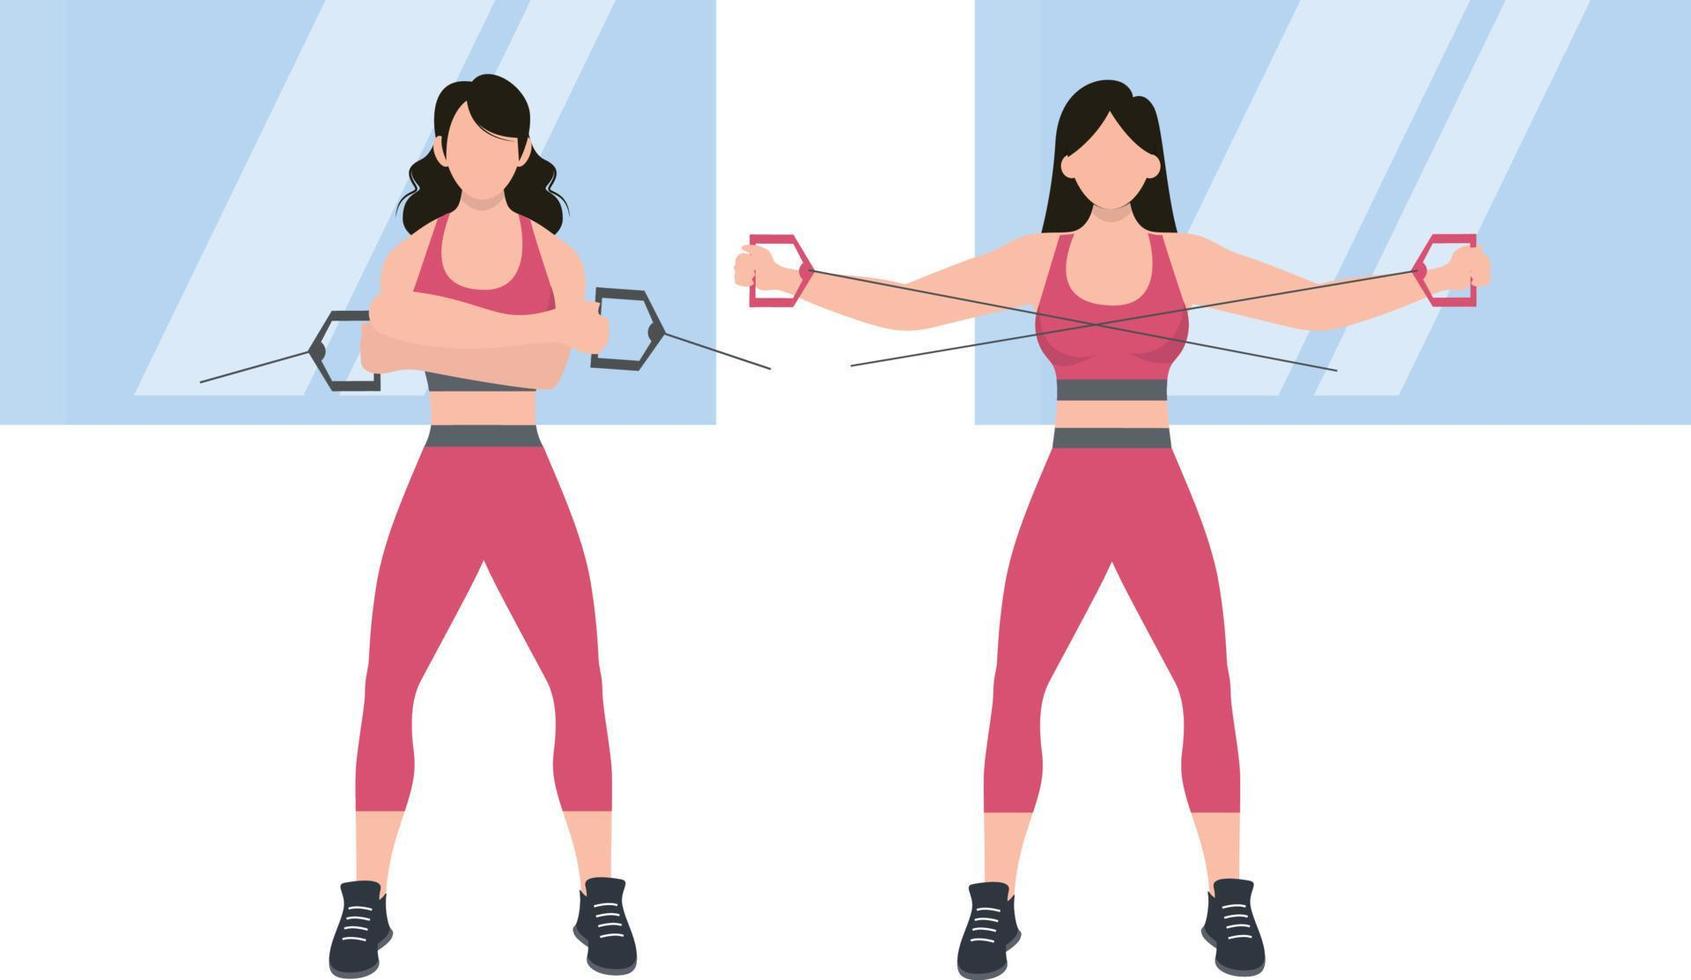 The girl is doing a stretching exercise. vector